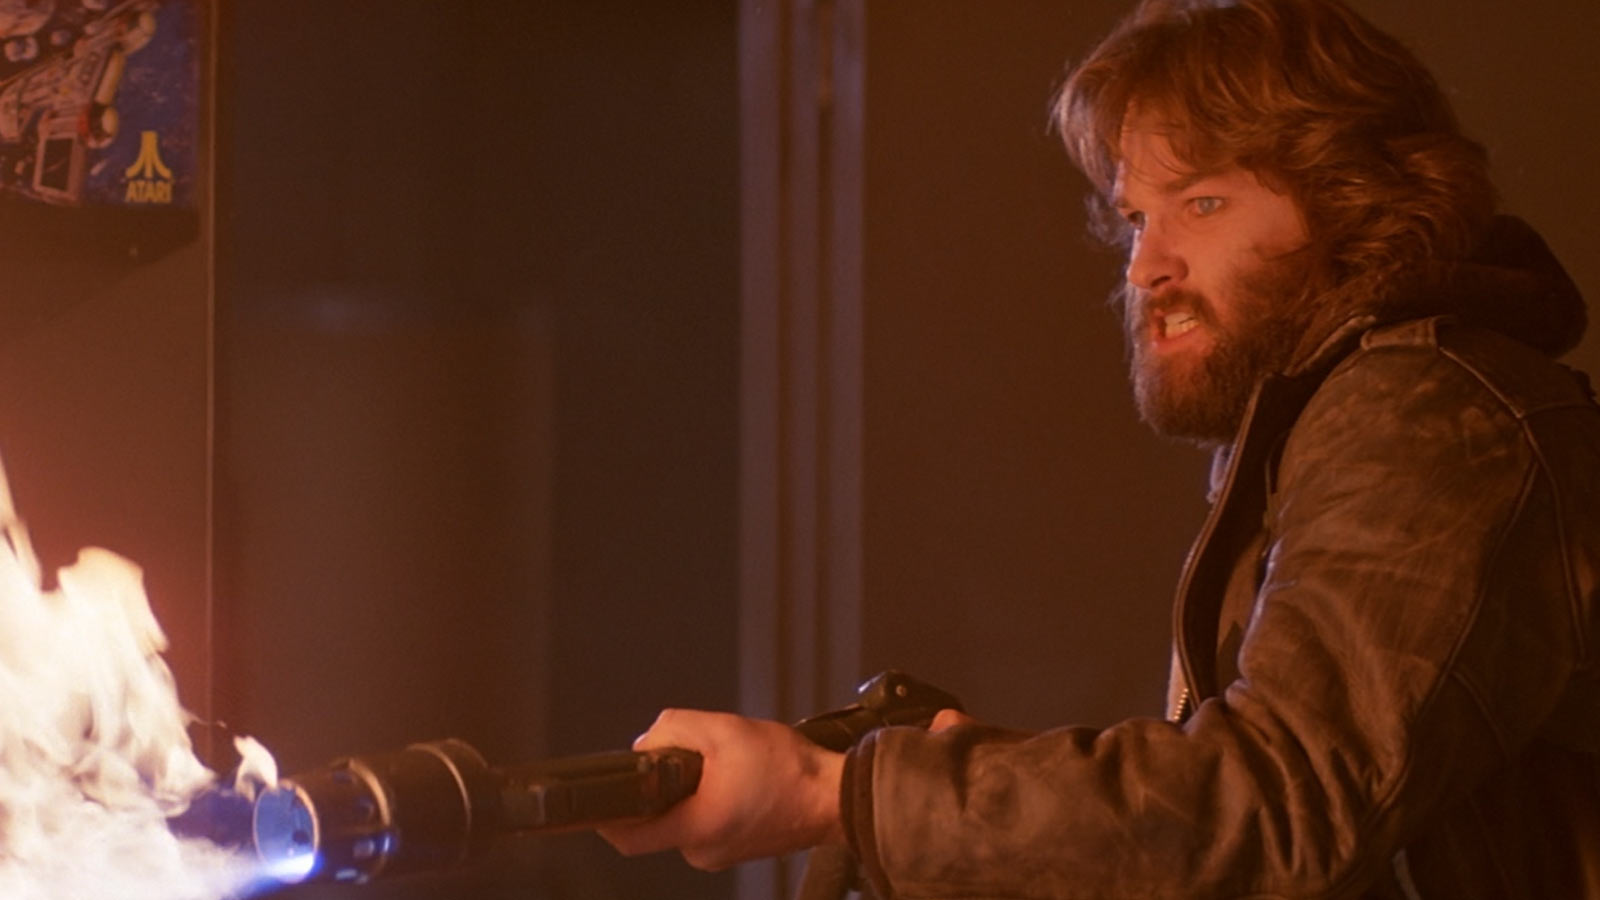 REVIEW - 'The Thing' (1982)